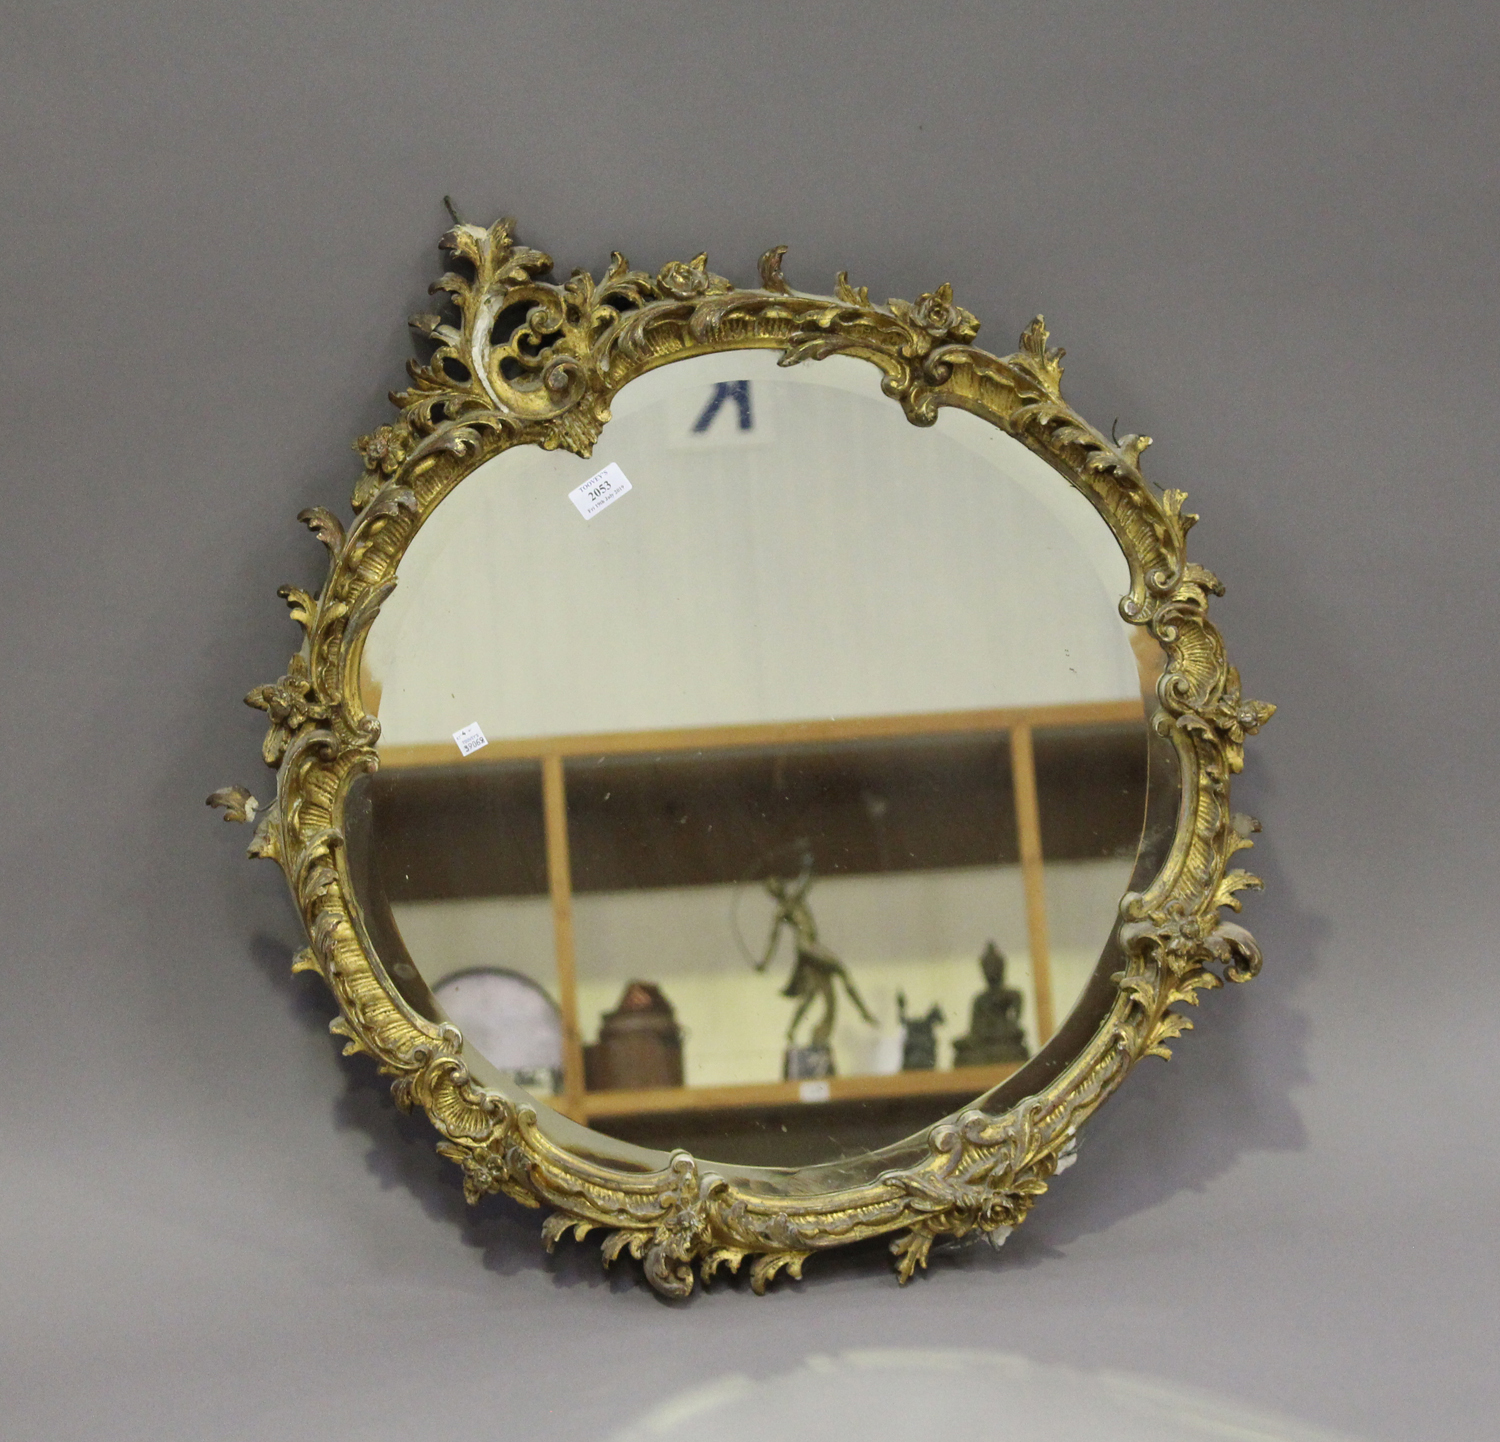 A 19th century giltwood and gesso circular wall mirror, decorated with floral scrolls, 80cm x 71cm.